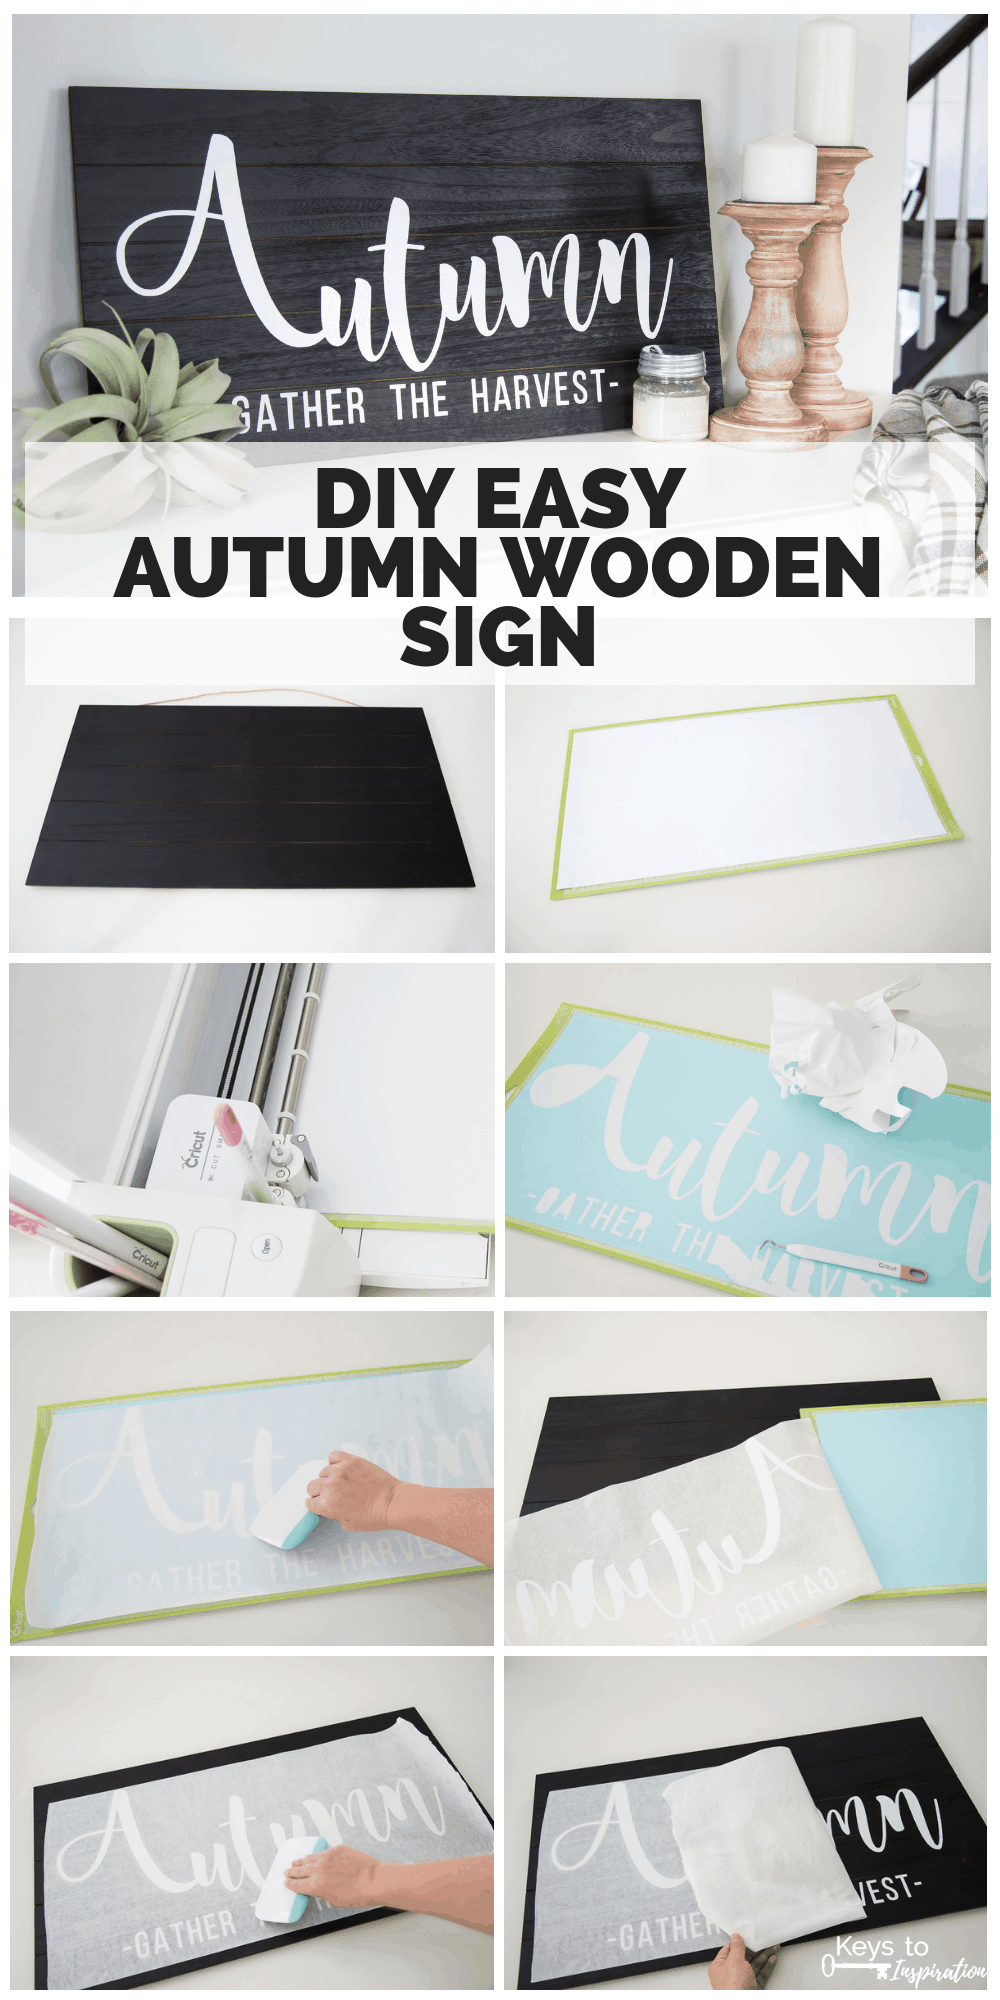 DIY Easy Autumn Wooden Sign » Christene Holder -   17 diy projects to try crafts ideas